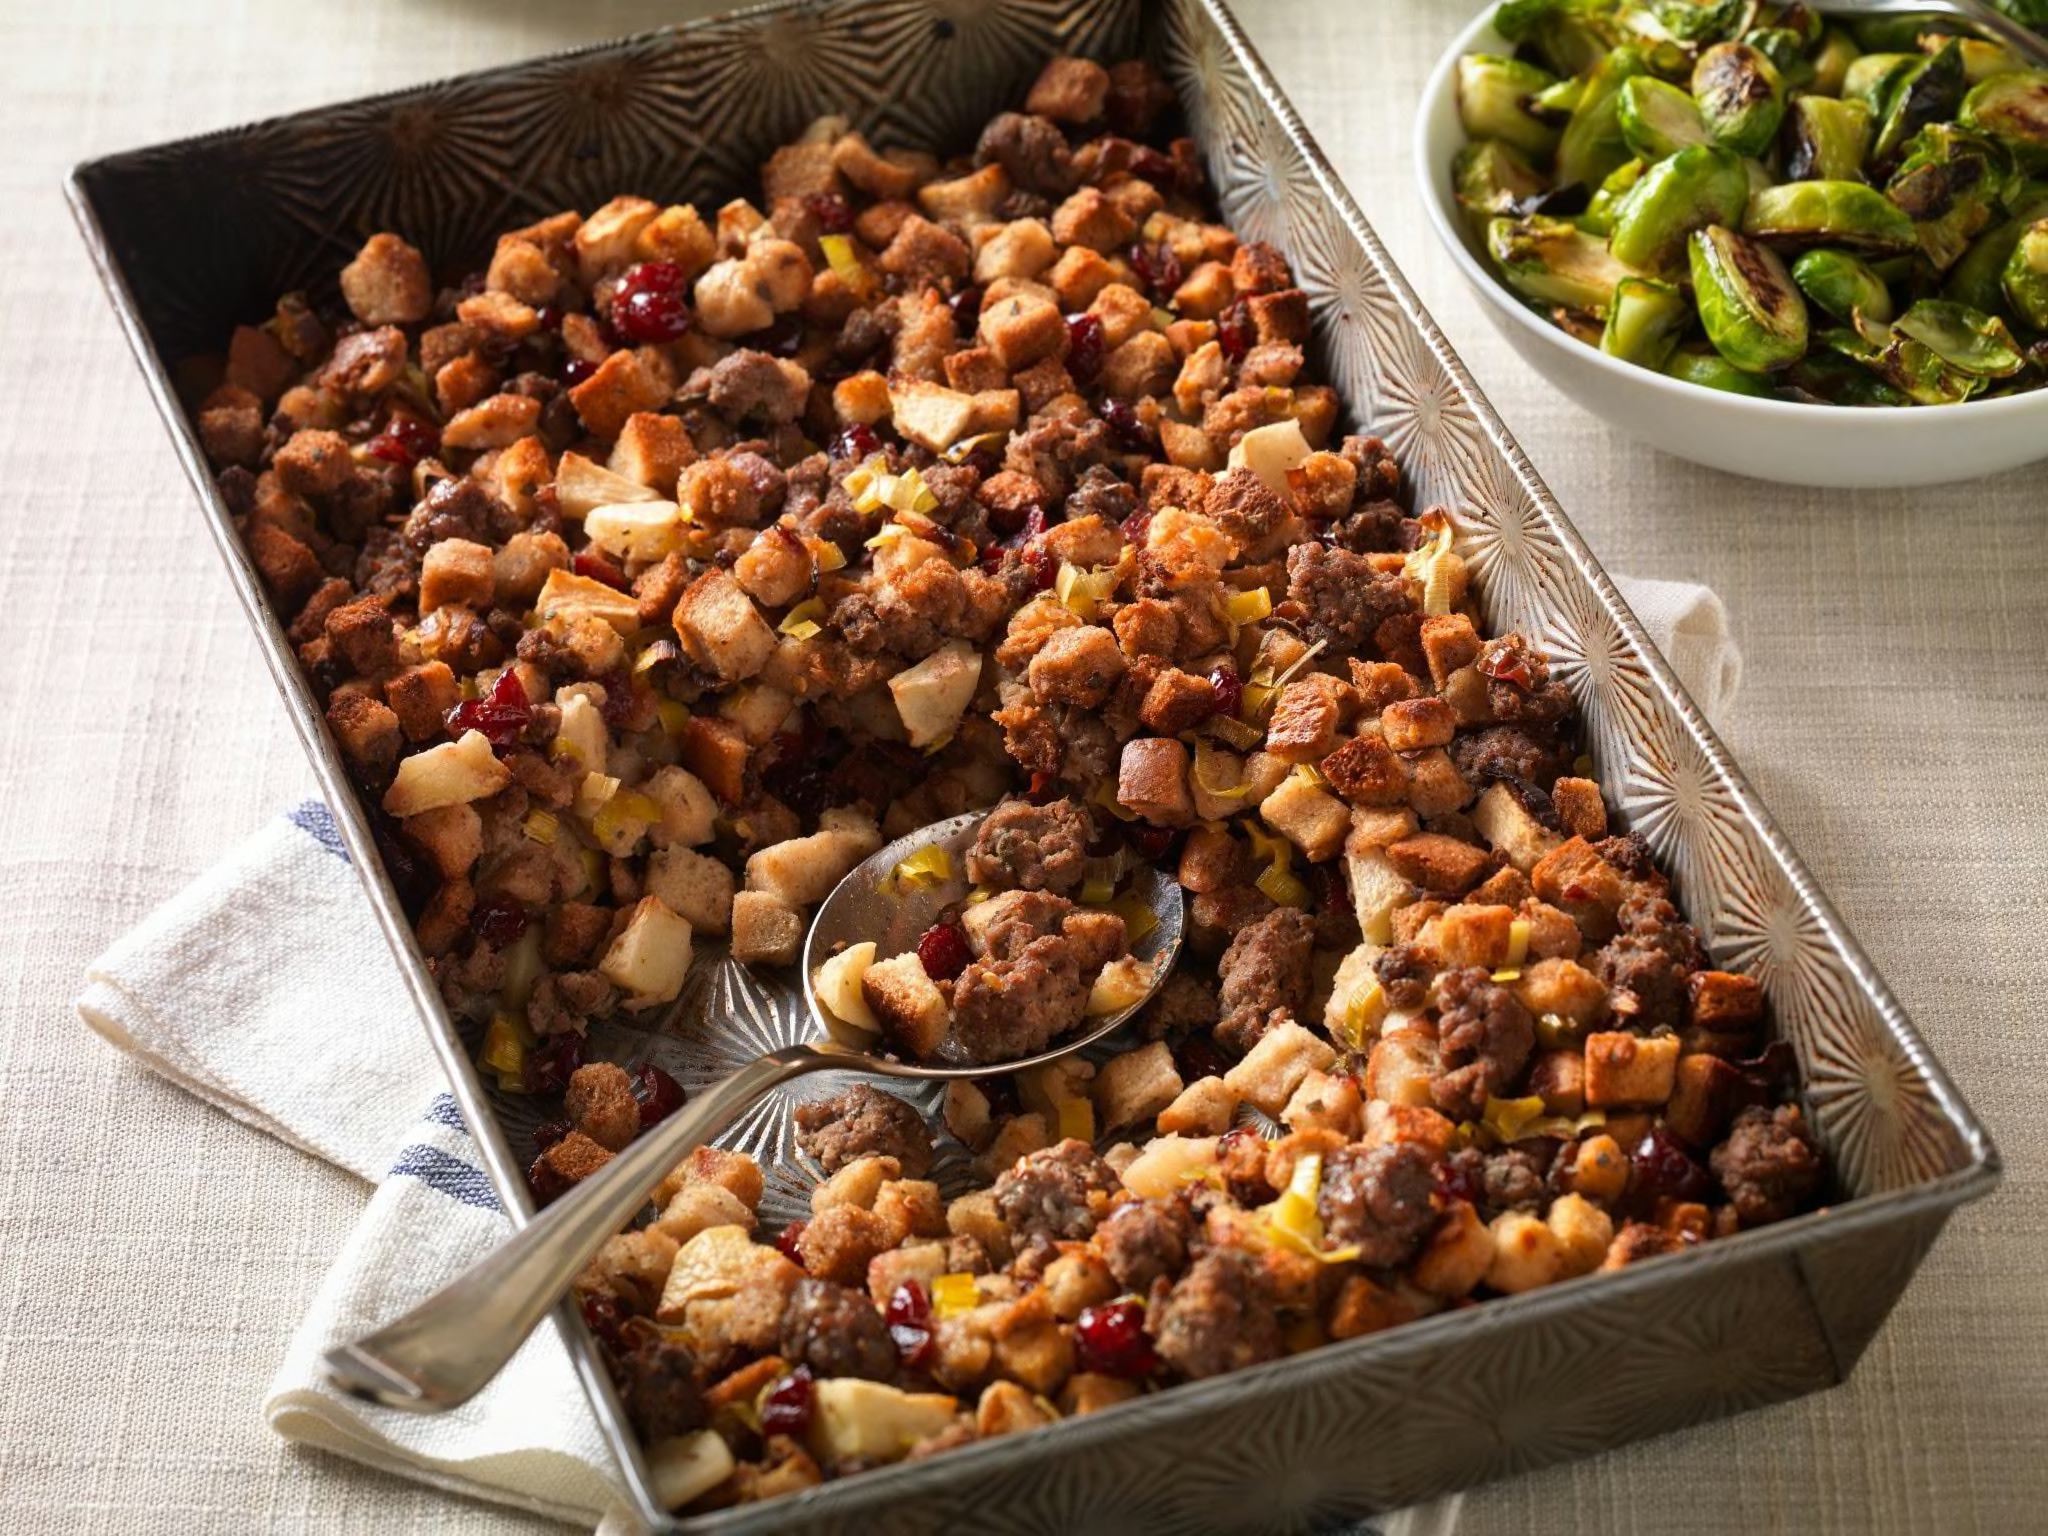 Creative stuffing recipes get a twist on favorite ingredients